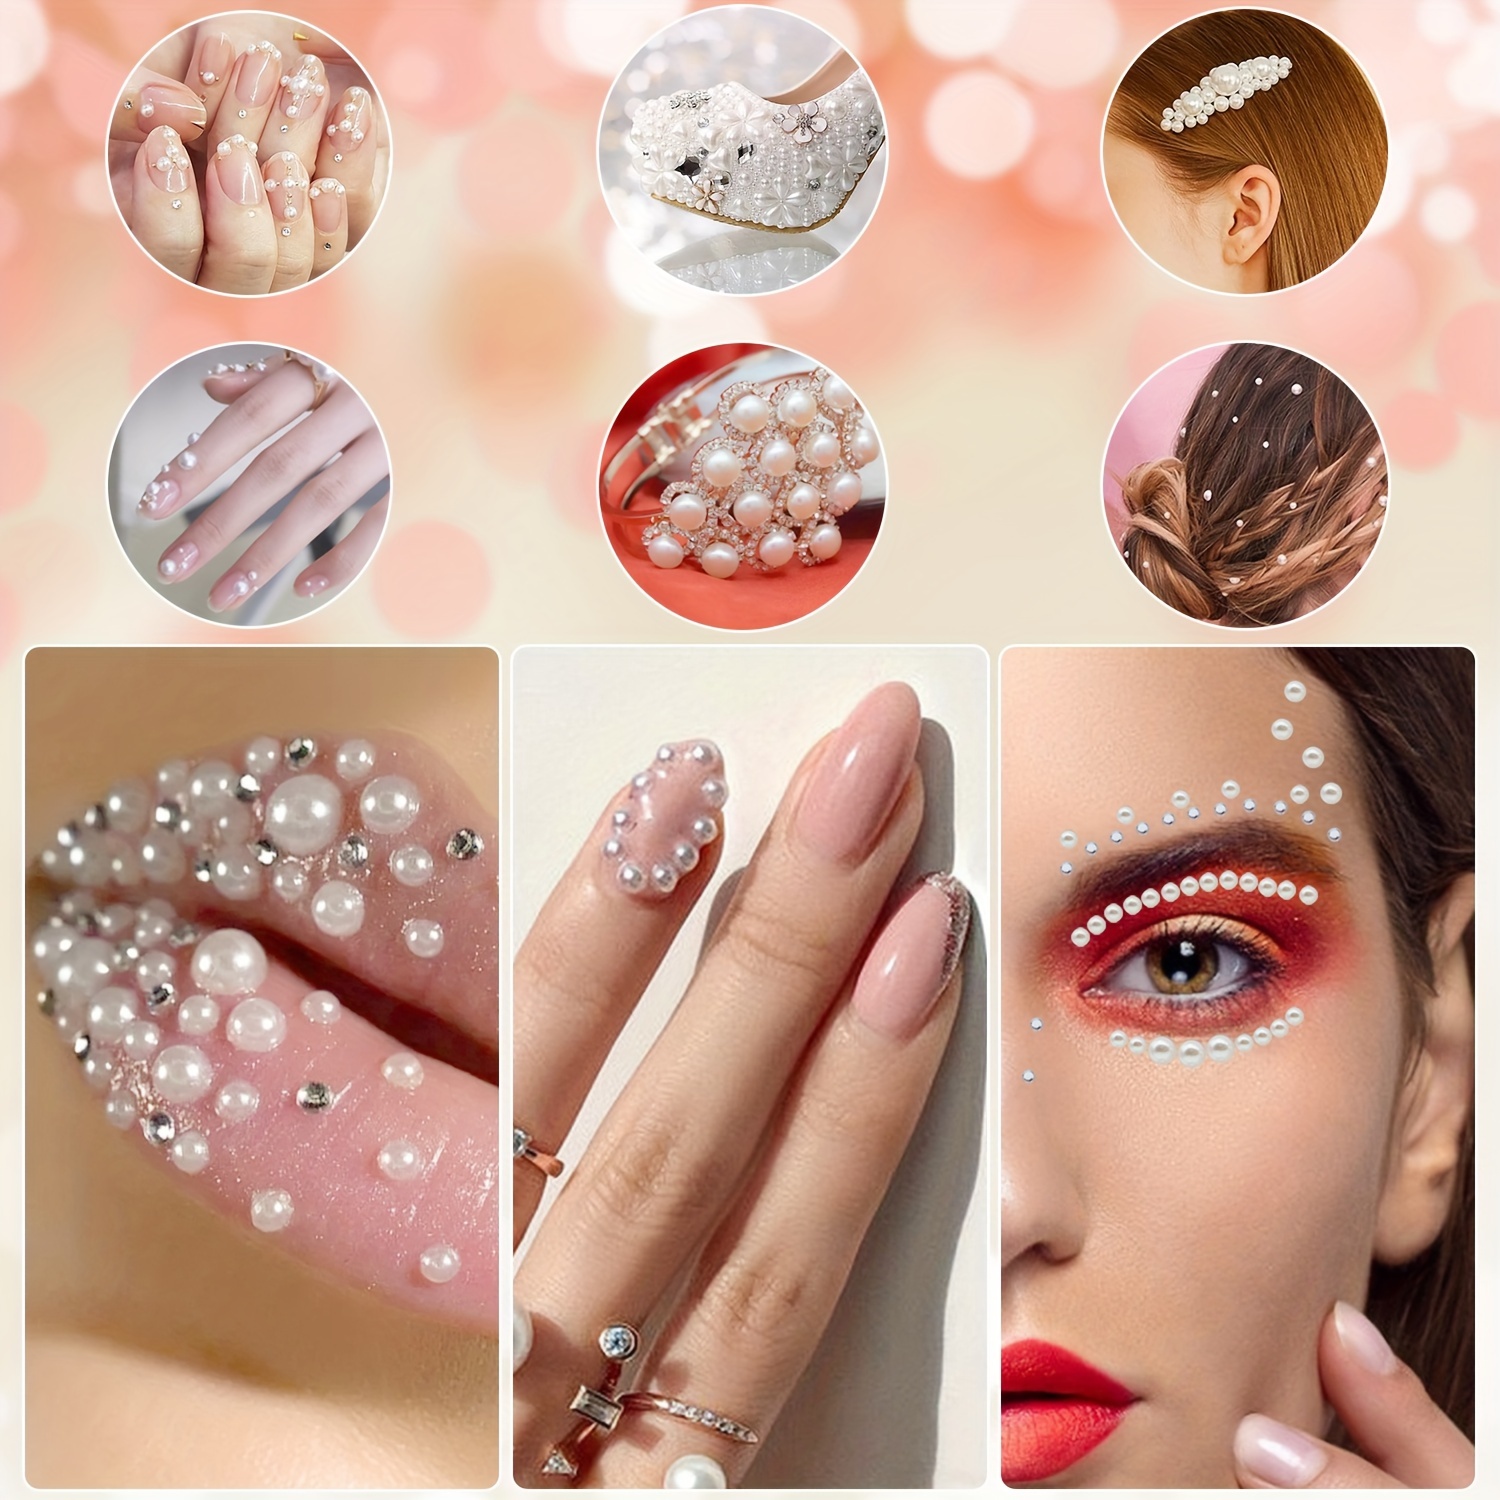 Rhinestone Stickers, Self Adhesive Jewel Stickers, Bling Gems for Crafts,  Stick on Gems for Makeup, DIY, Eye, Nail,Combination 2